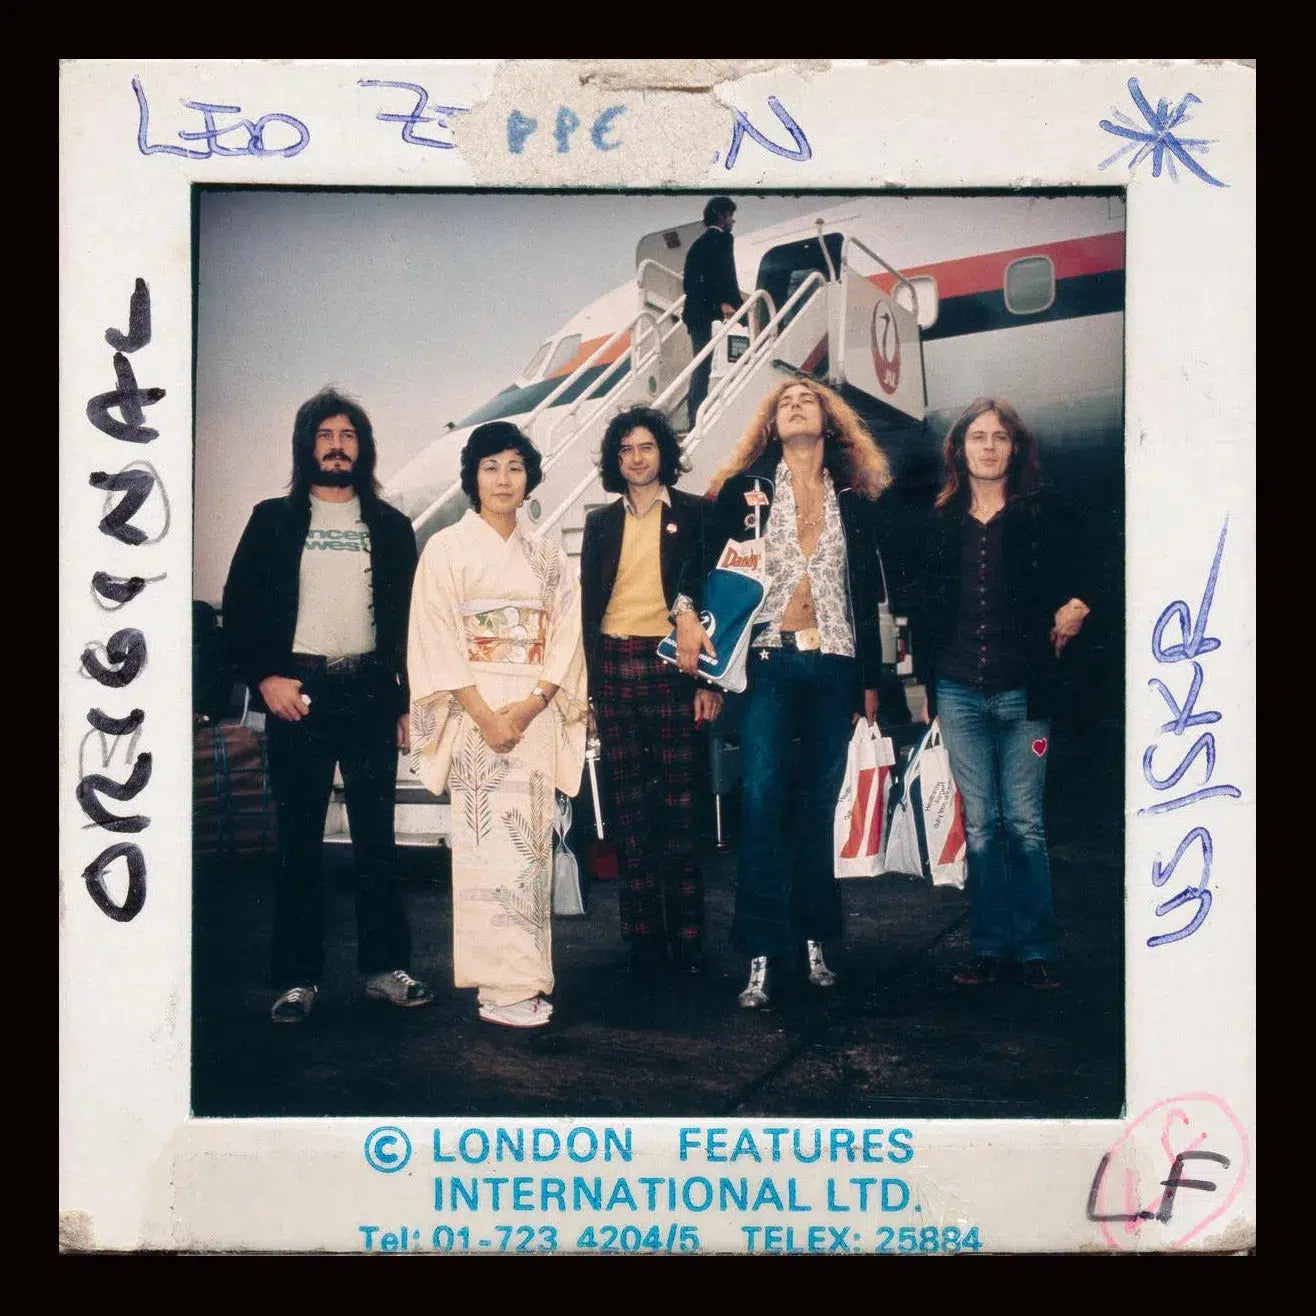 Led Zeppelin - Slide 1, from The Wild Ones collection-PurePhoto